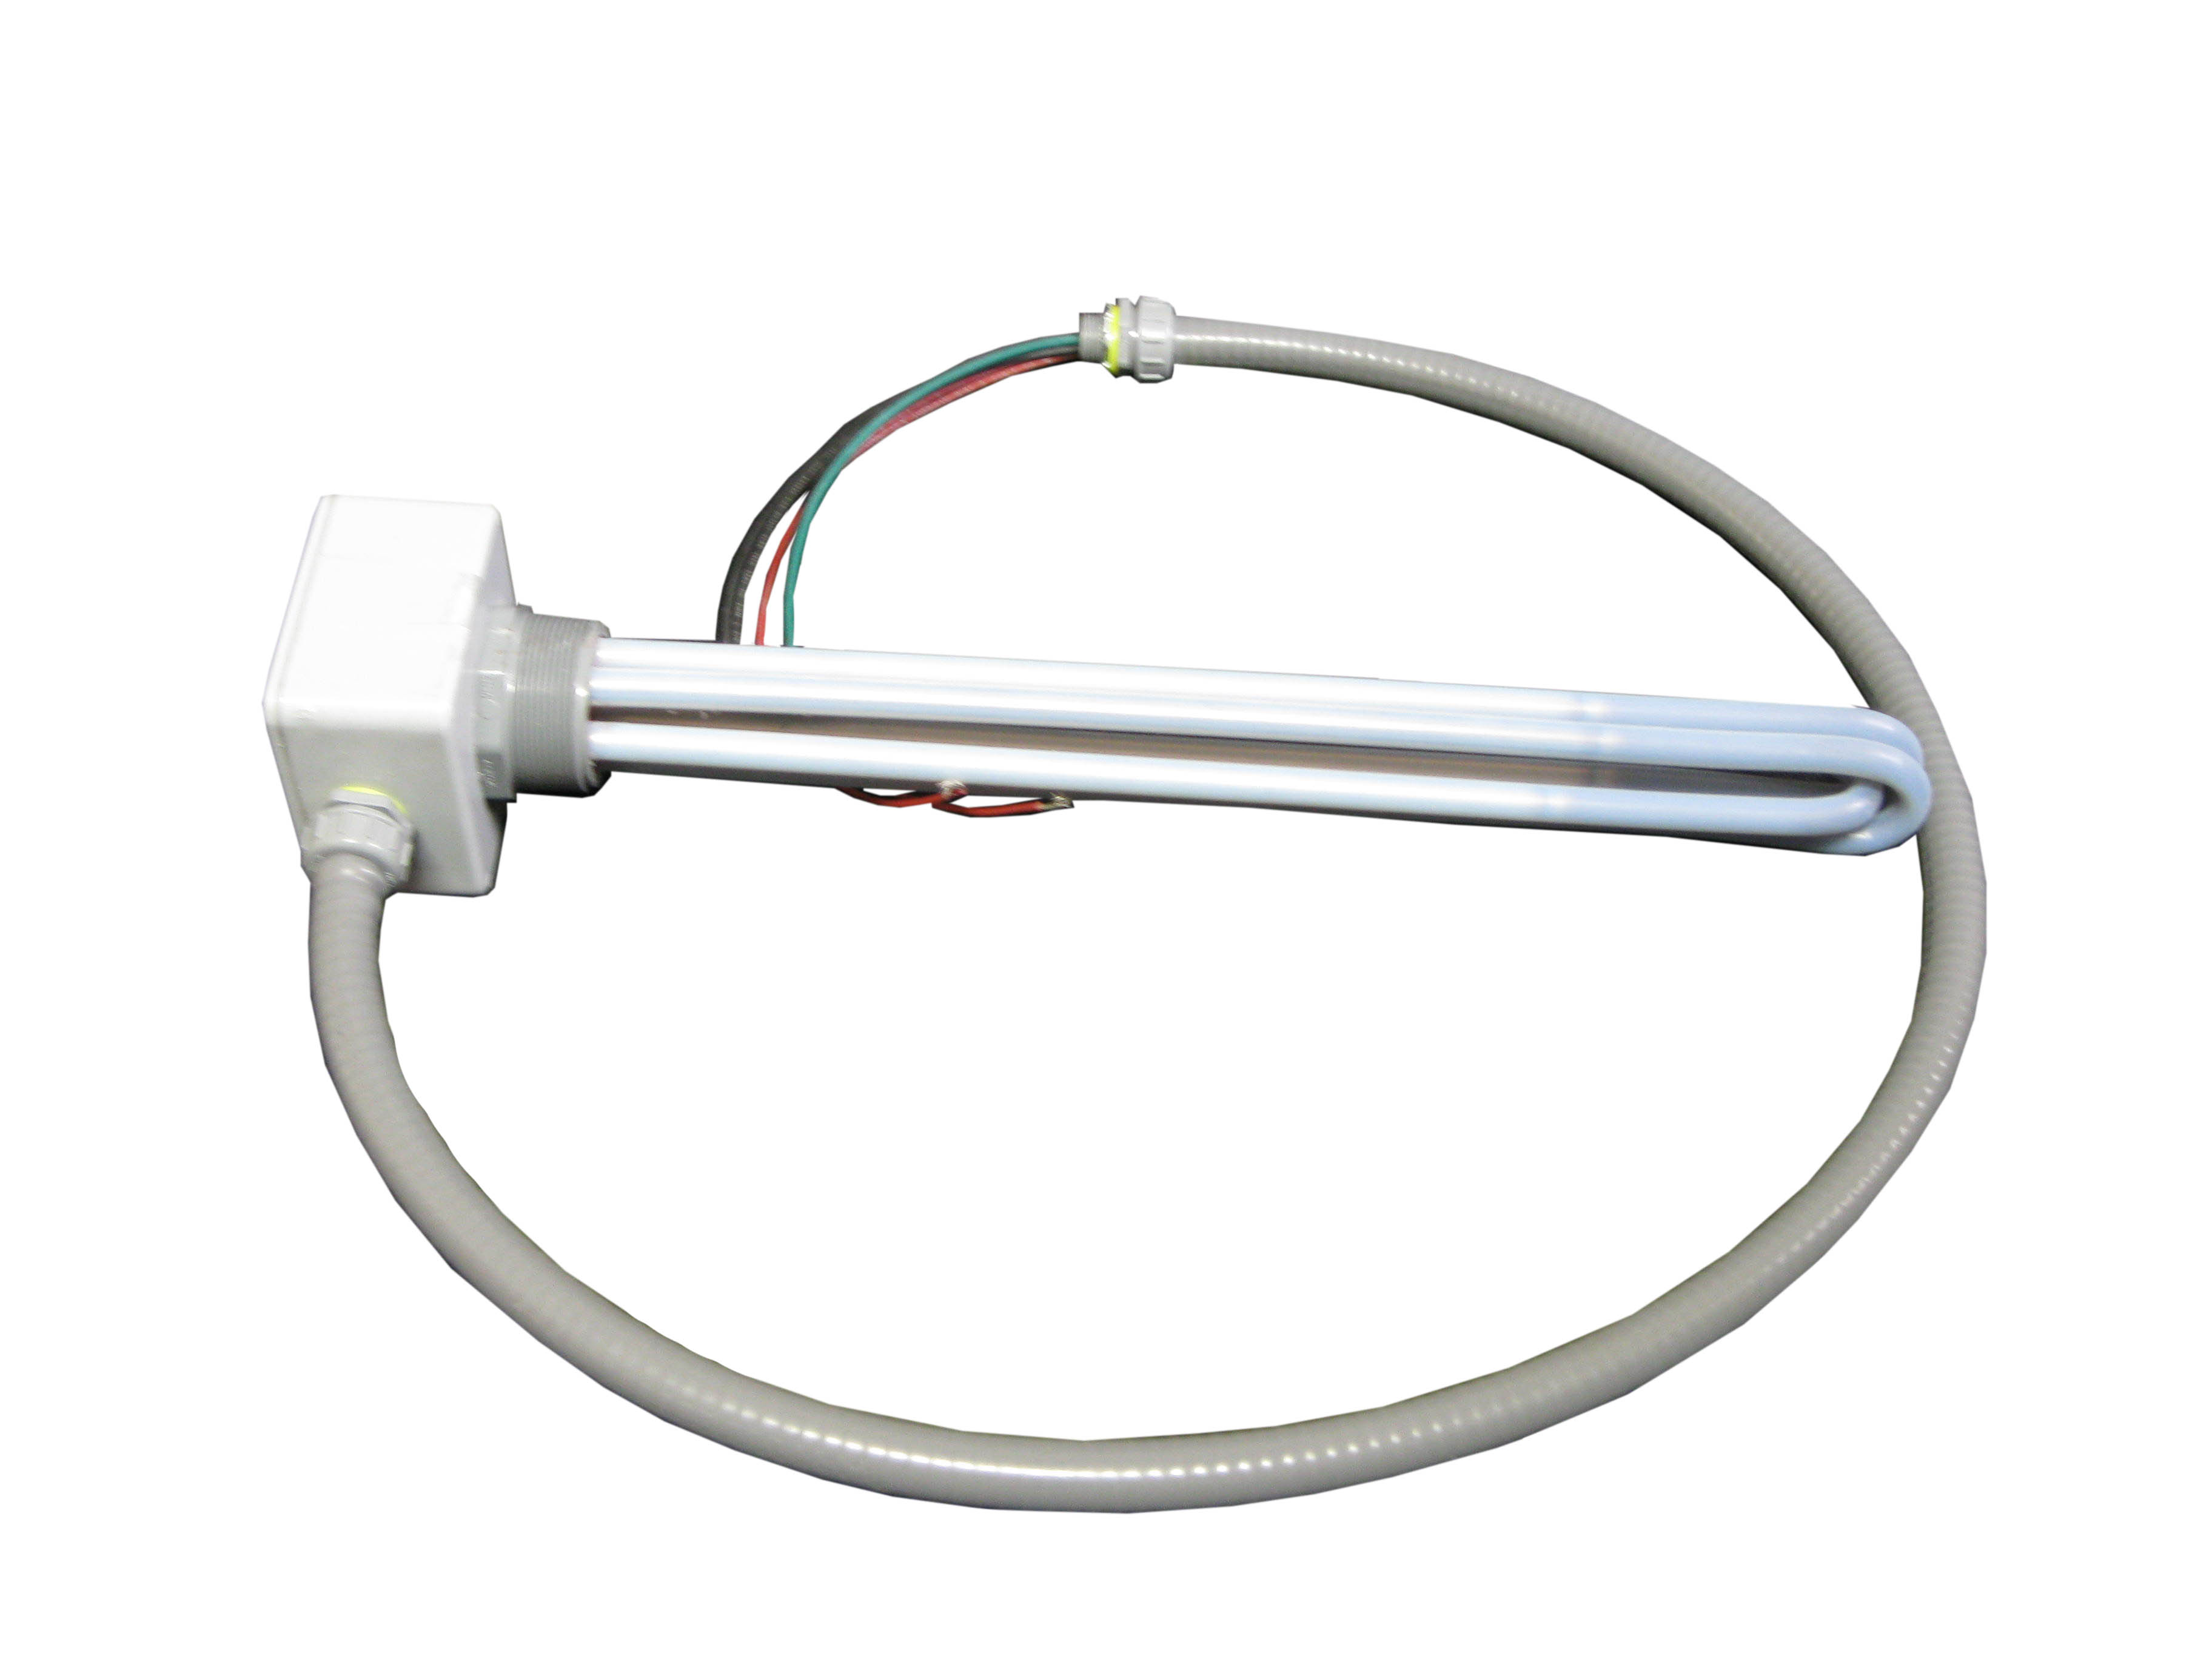 Flange Immersion Heaters  Electric Flange Immersion Heaters